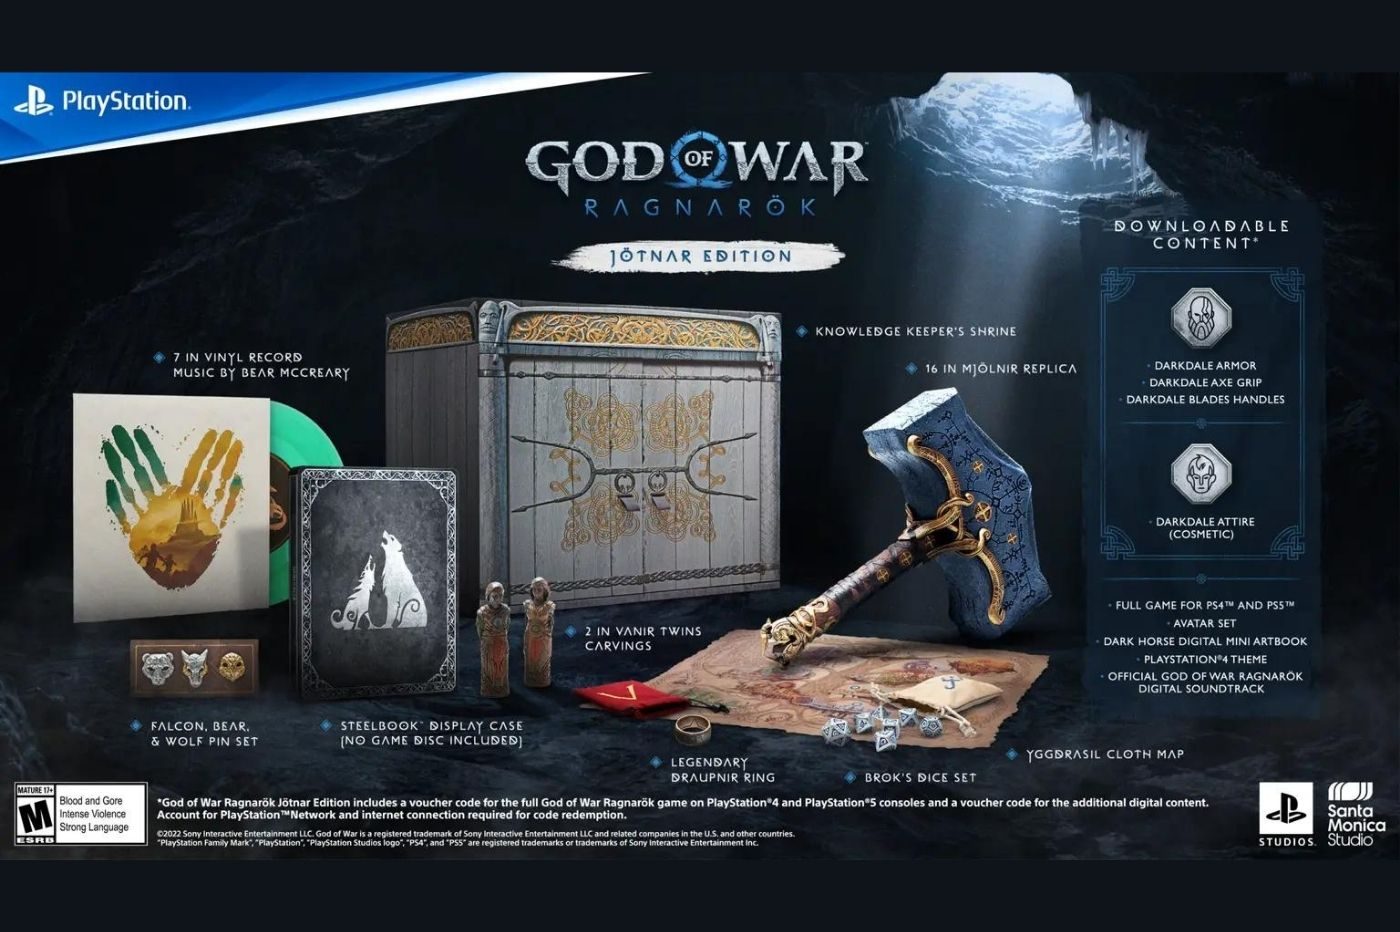 Promotional image of a special edition of God of War with its content.